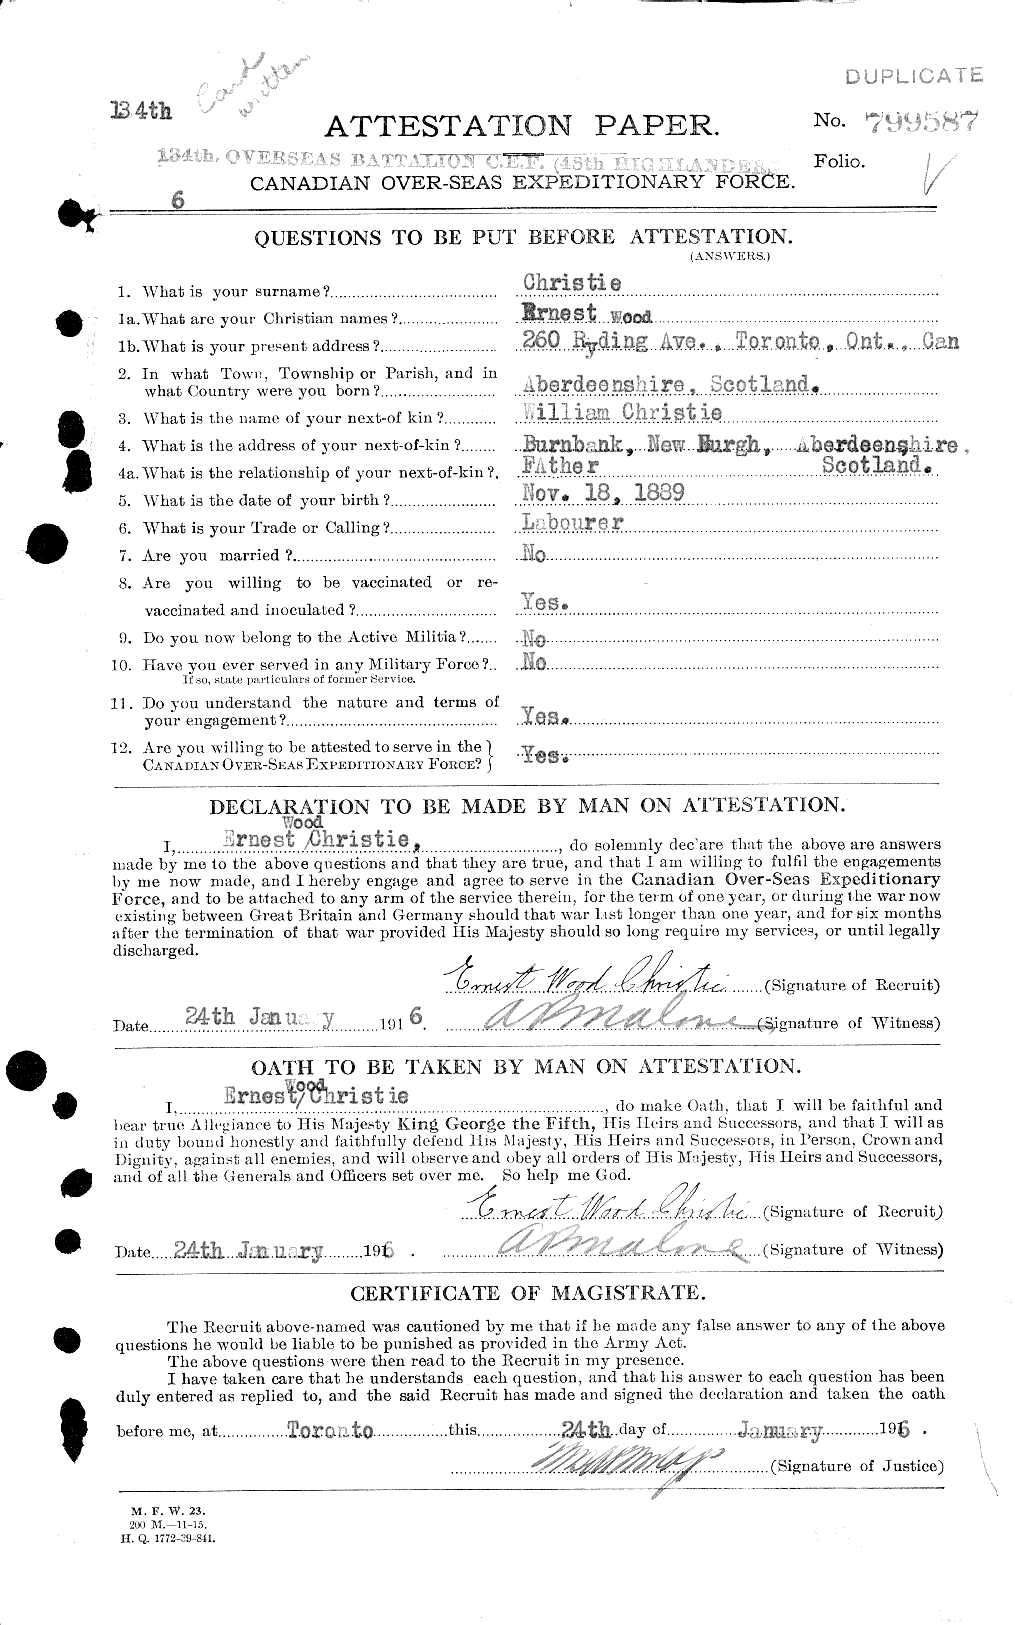 Personnel Records of the First World War - CEF 021923a